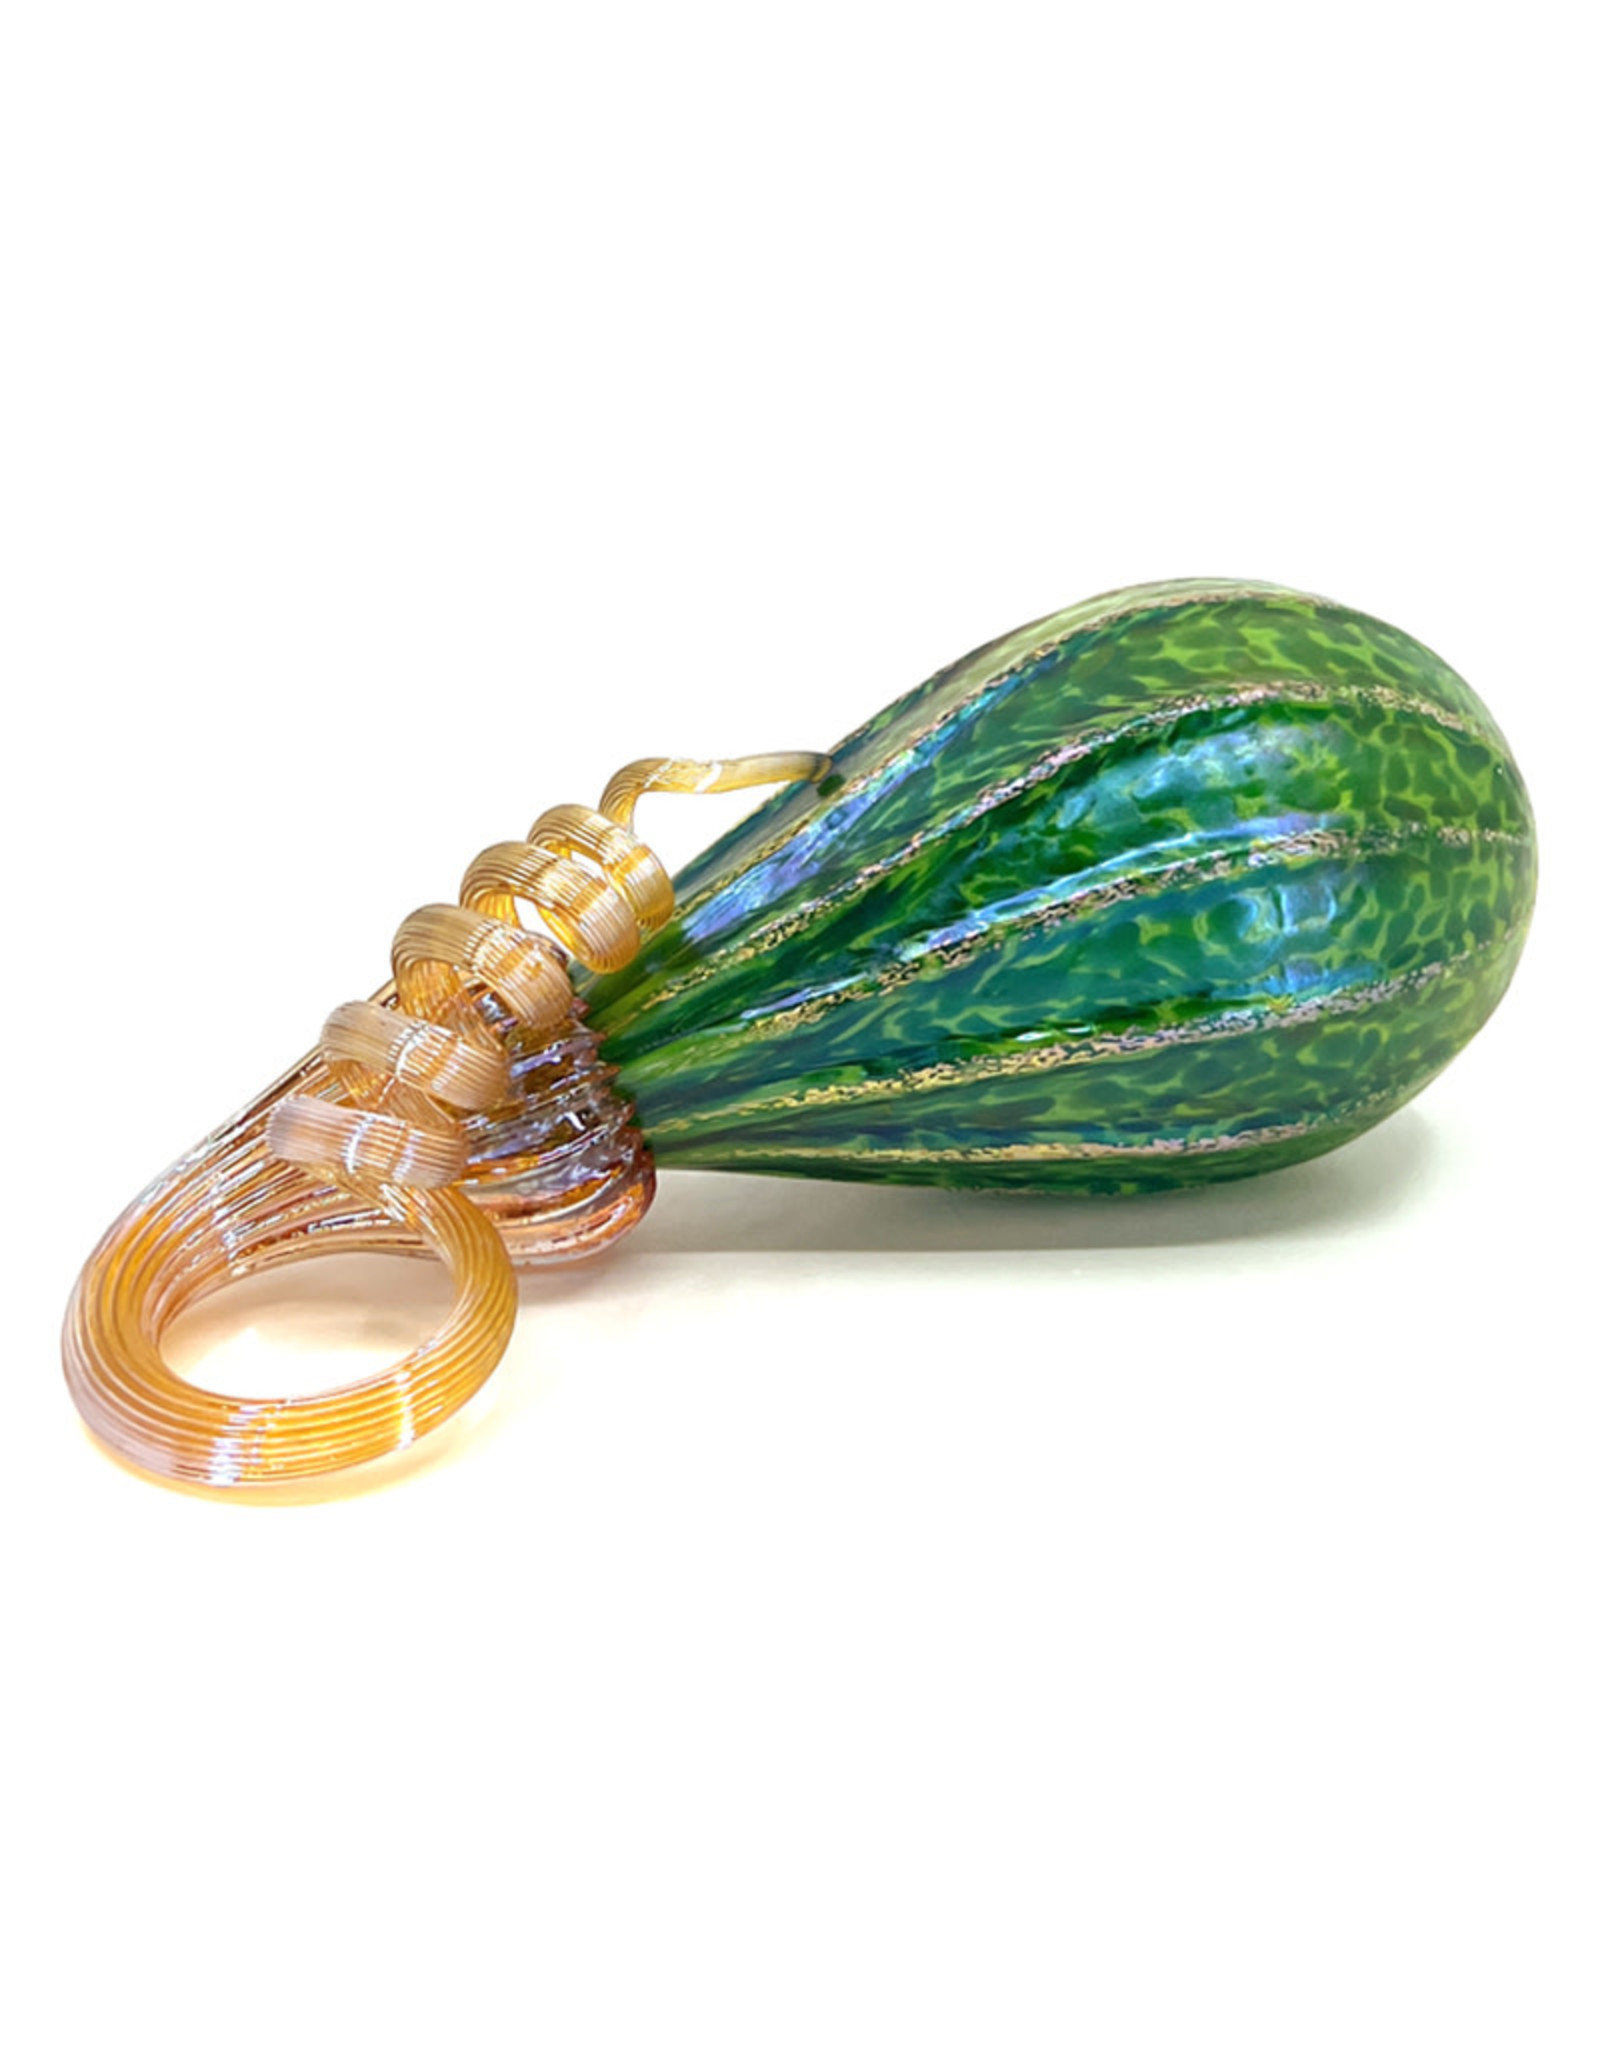 THE FURNACE GLASSWORKS GREEN MEADOWS PETITE GOURD